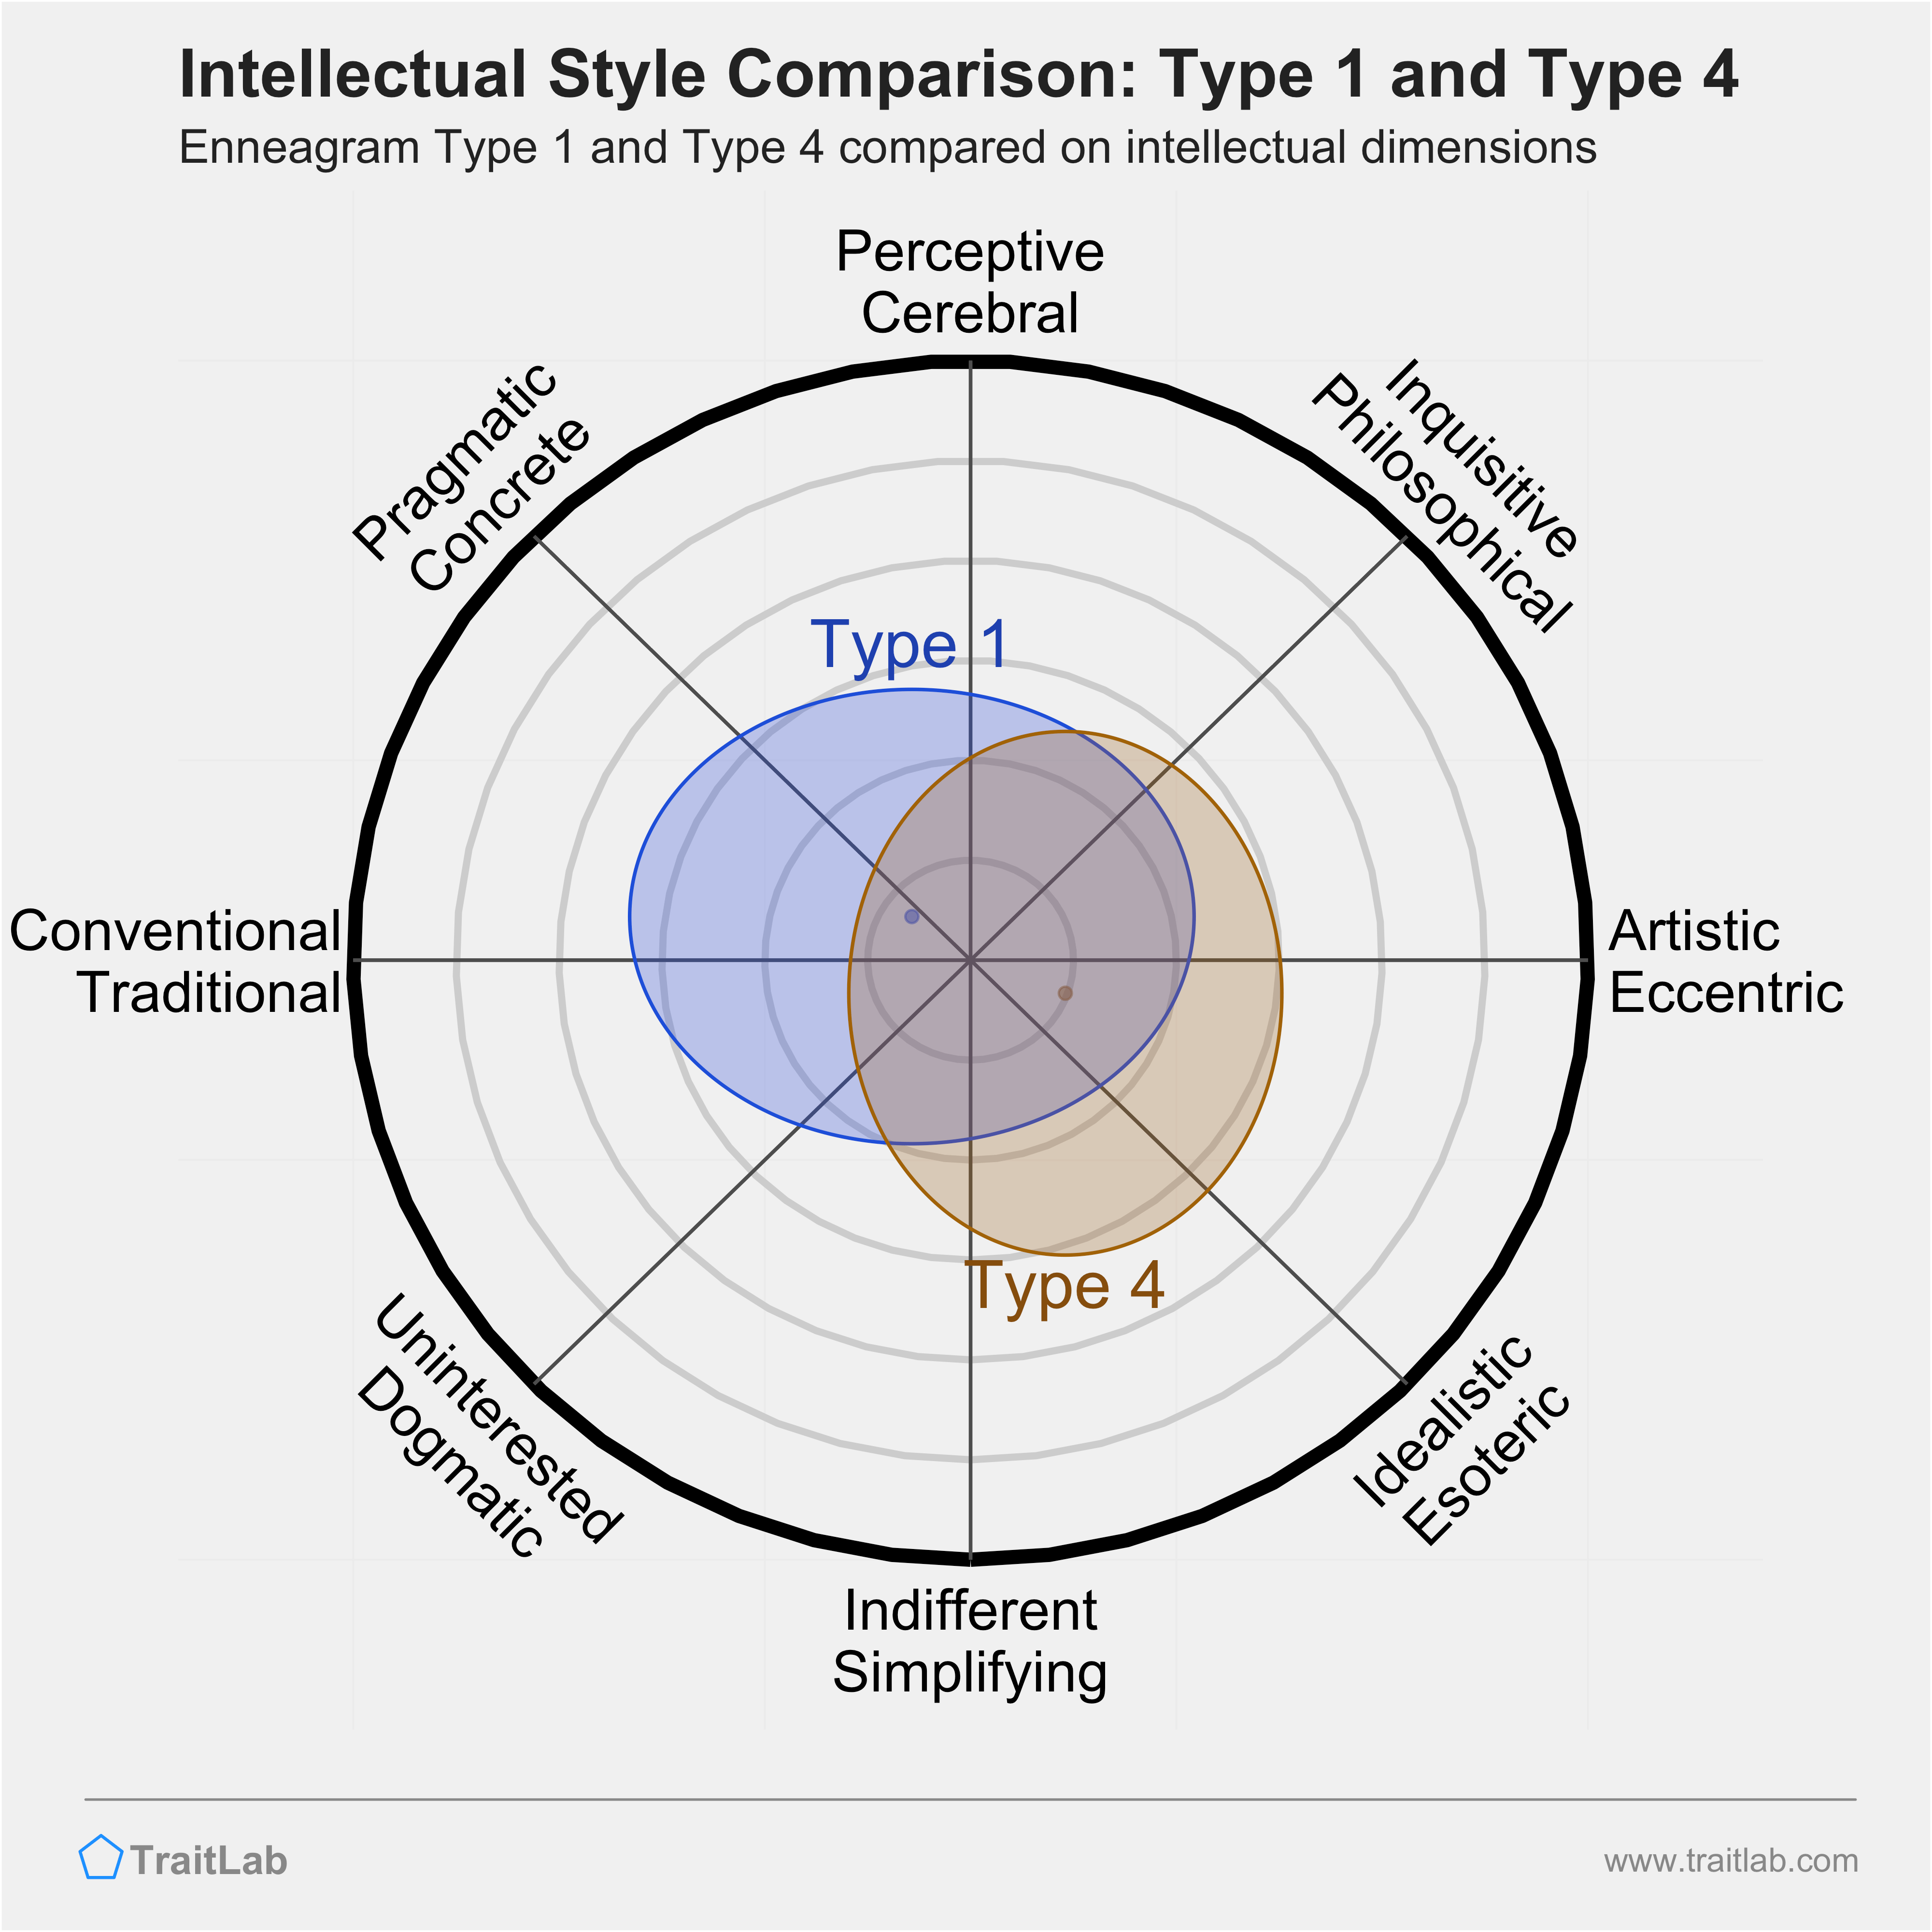 Type 1 and Type 4 comparison across intellectual dimensions